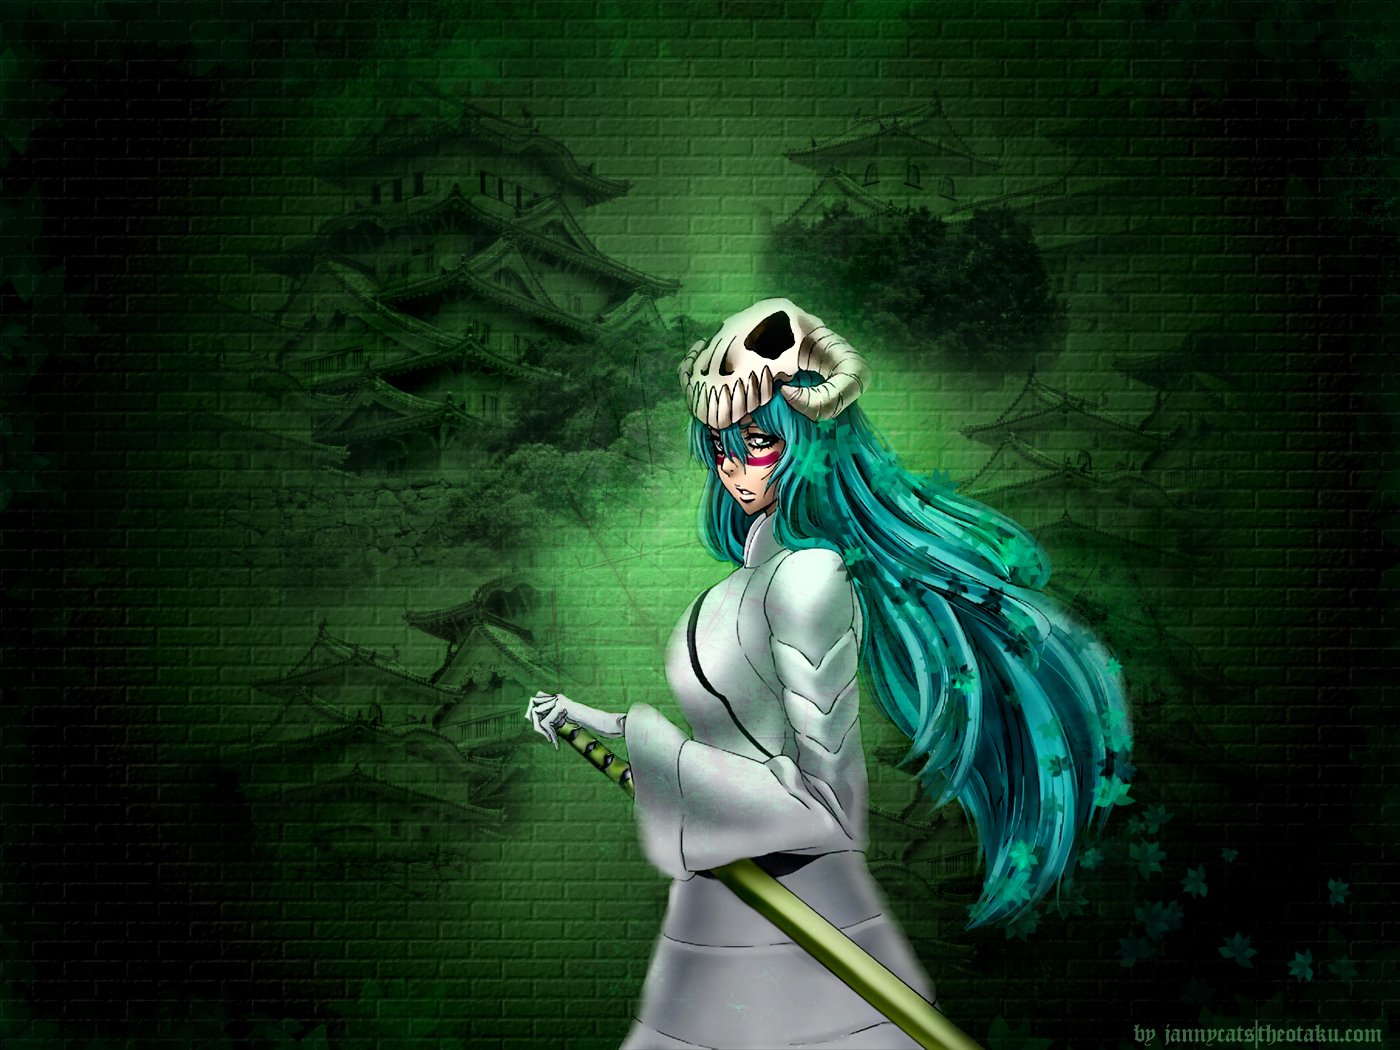 Backgrounds-Bleach-Anime-Wallpapers by TristonTheWolf on DeviantArt